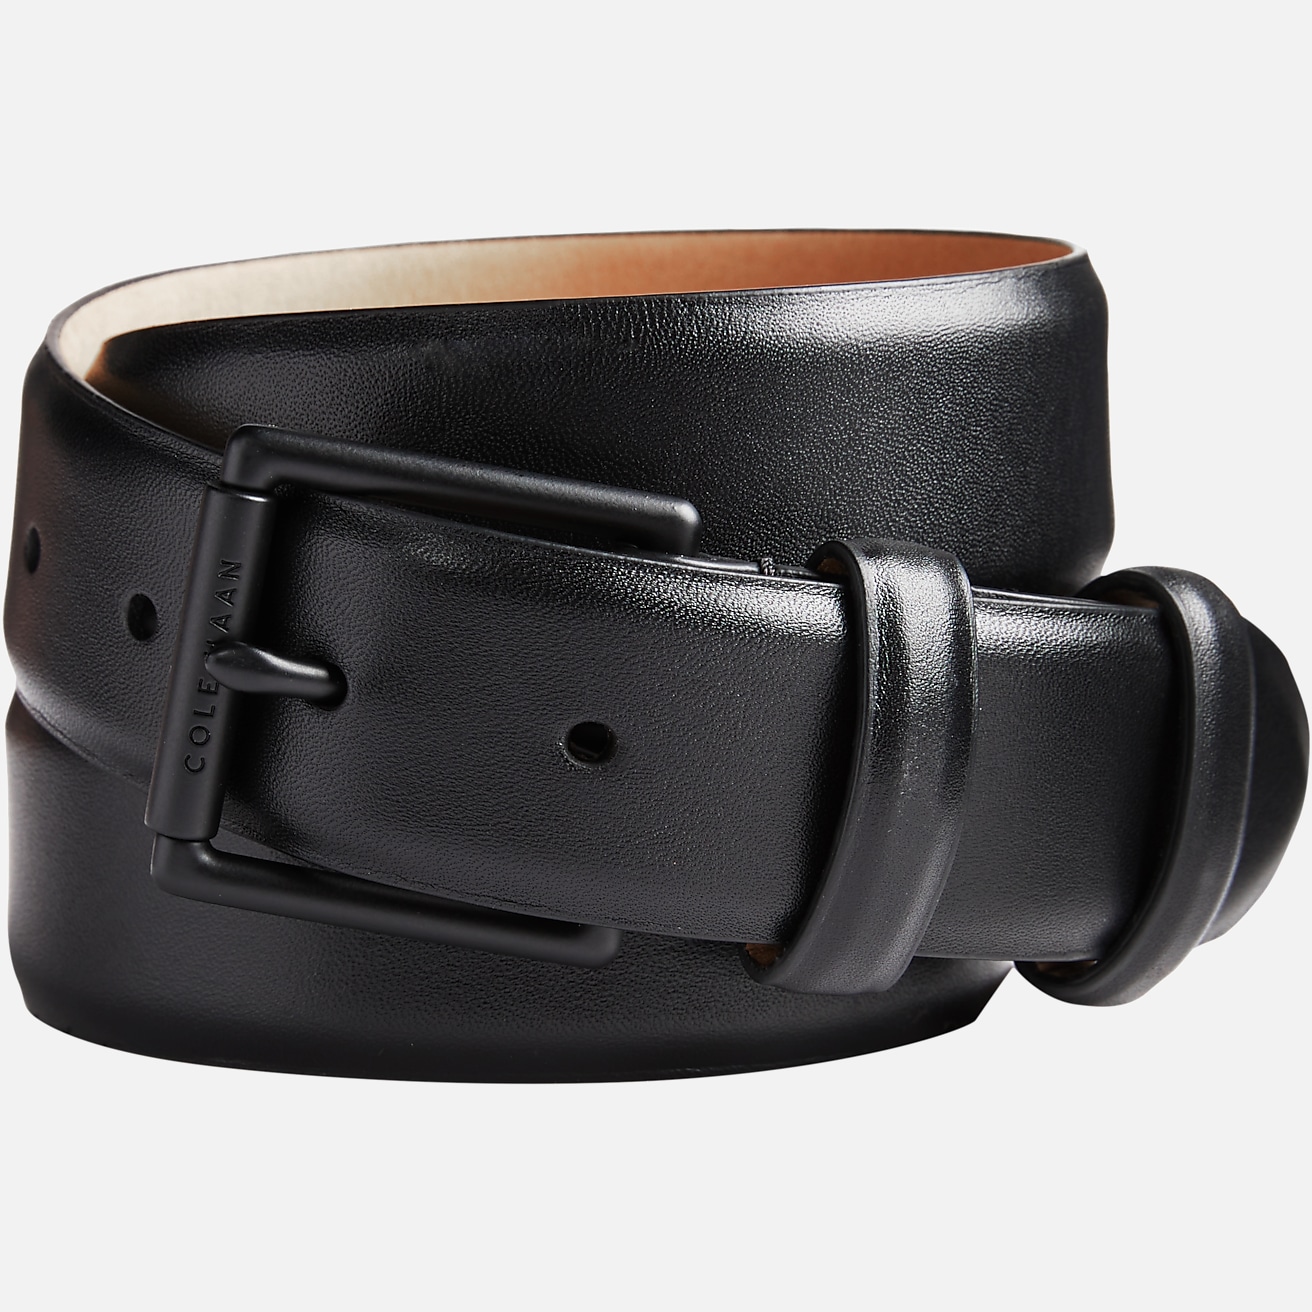 https://image.menswearhouse.com/is/image/TMW/TMW_8VR4_02_COLE_HAAN_BELTS_BLACKBLACK_MAIN?imPolicy=pdp-mob-2x